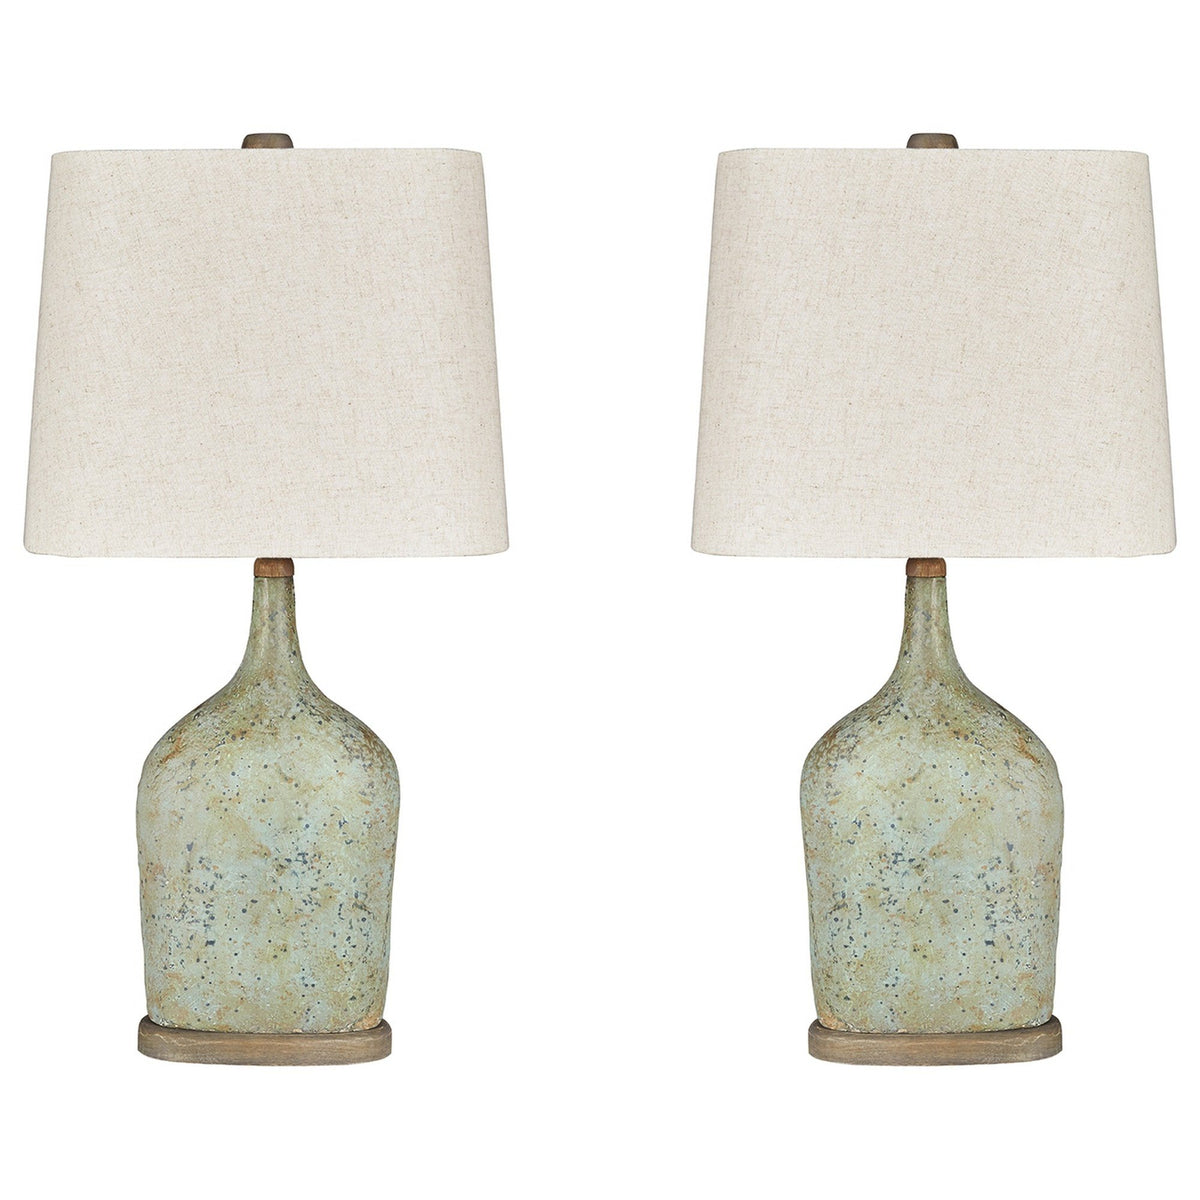 Bottle Shape Paper Composite Table Lamp with Fabric Shade, Set of 2, Gray - BM226580